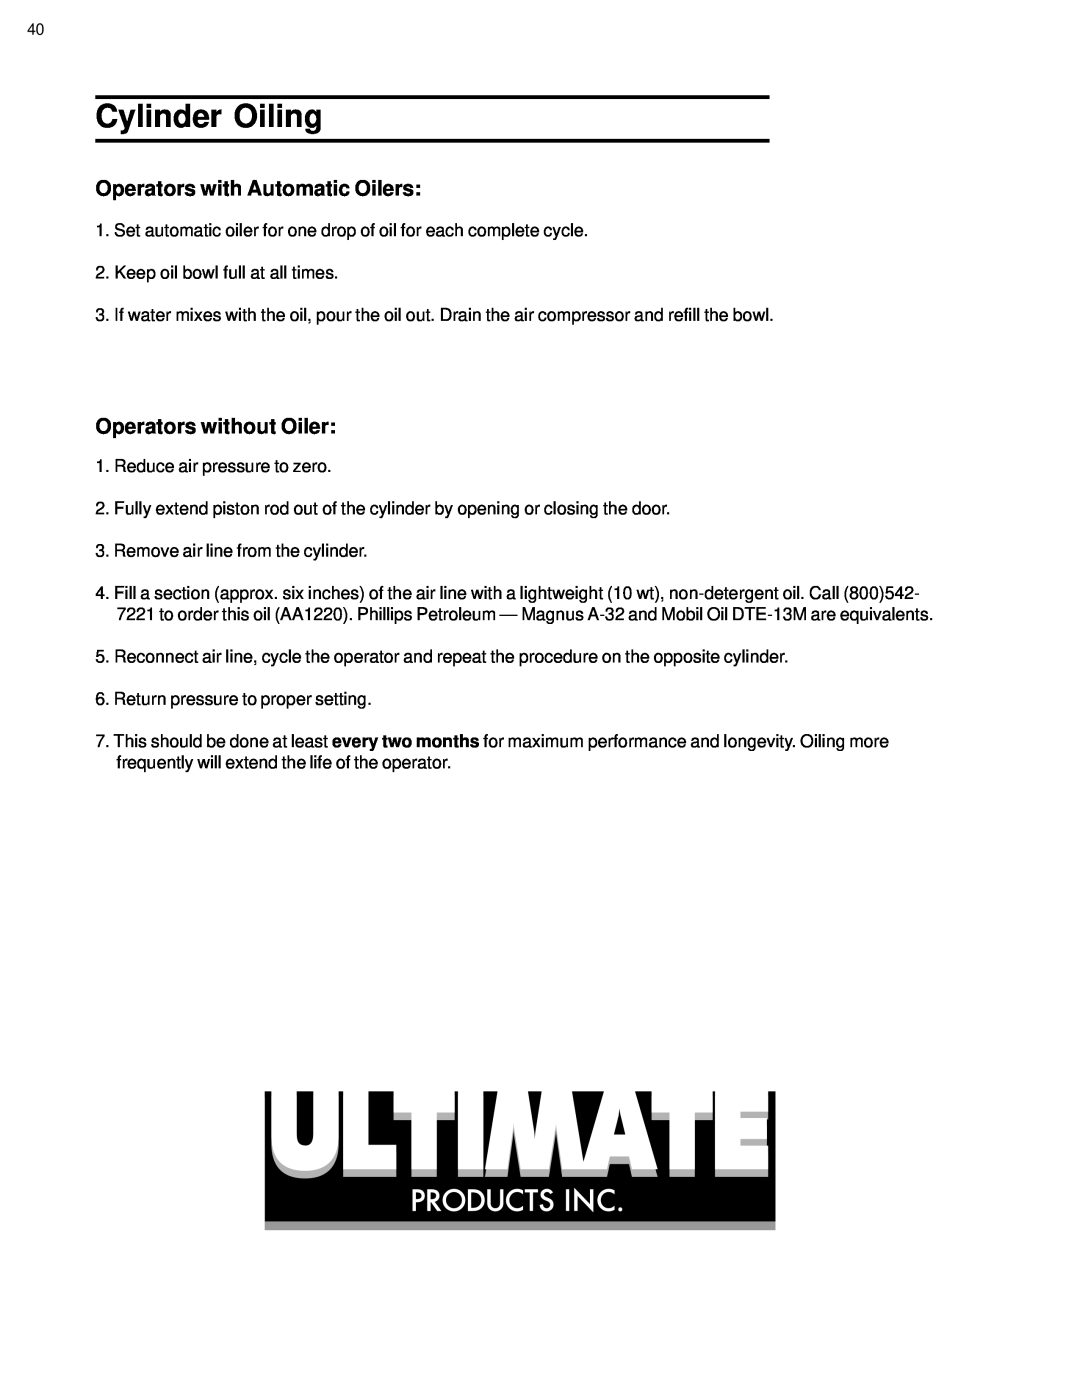 Ultimate Products UP-206 manual Cylinder Oiling, Operators with Automatic Oilers, Operators without Oiler 